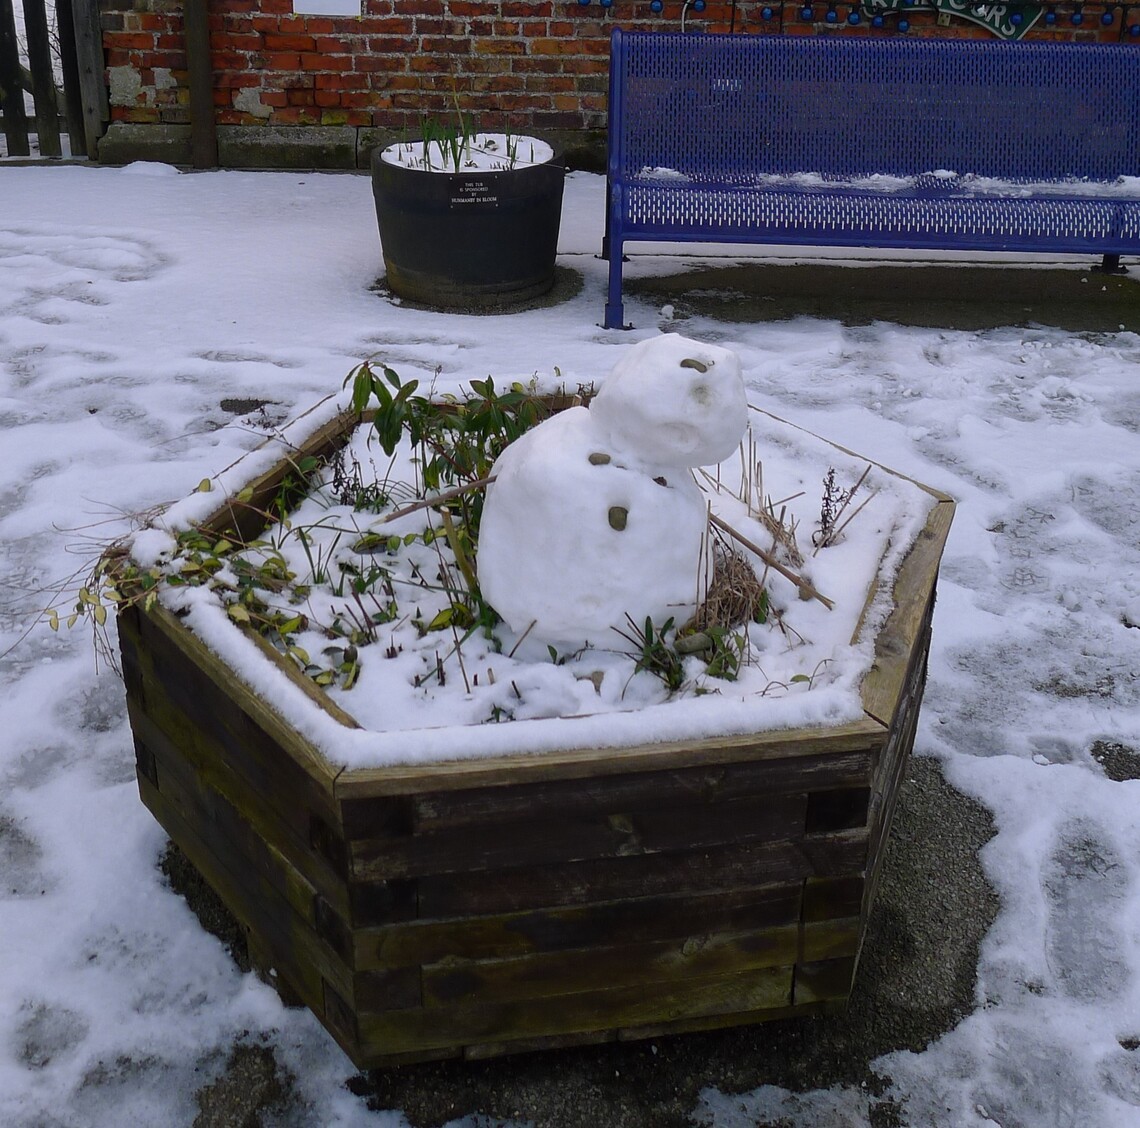 Snowman created at Hunmanby Railway Station 